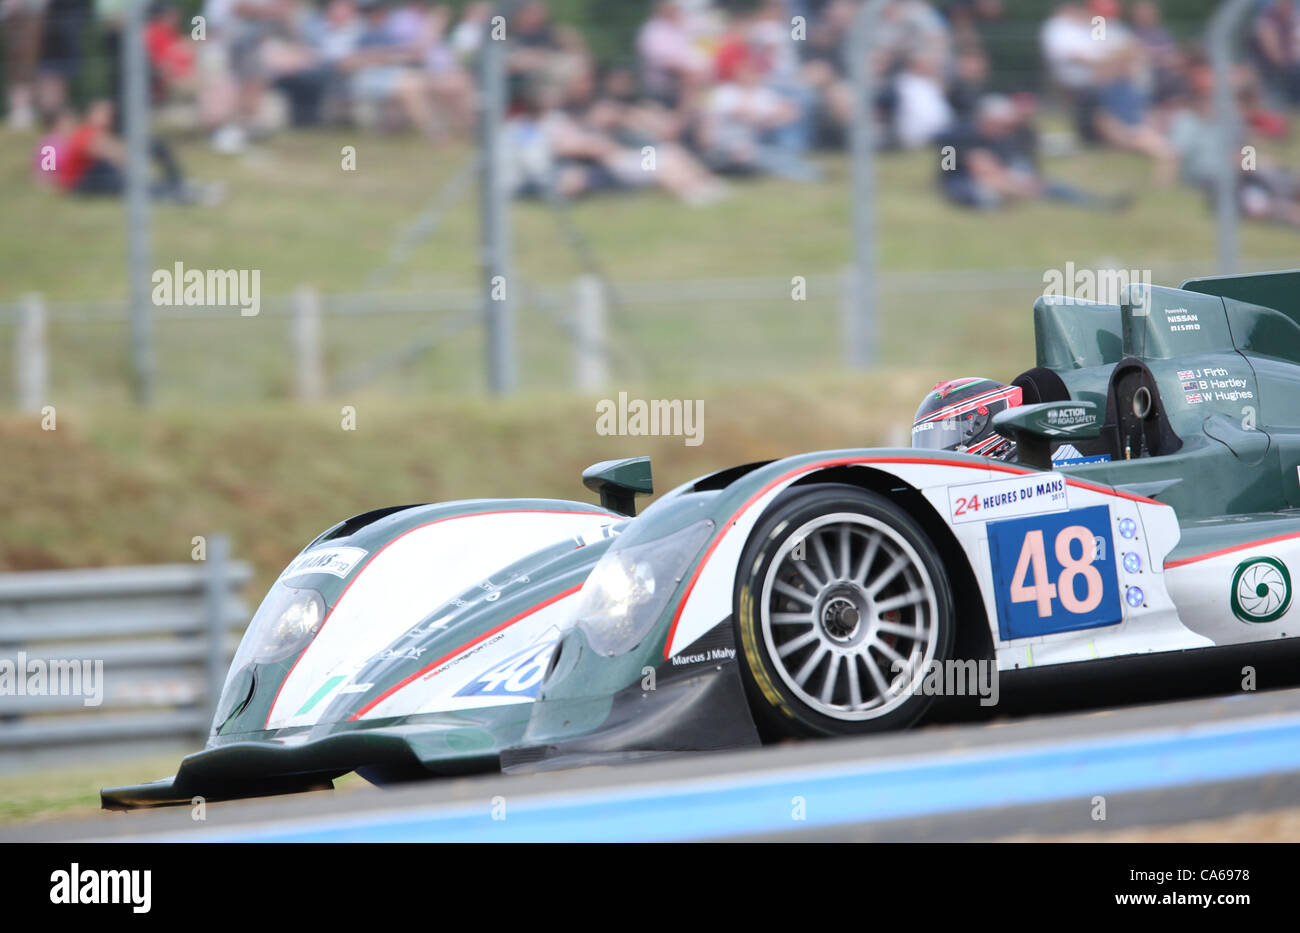 14.06.2012. Le Mans, France. The LMP2 class Oreca 03 of Murphy Prototypes with drivers Jody Firth, Brendon Hartley and Warren Hughes in action during the qualifying for the 80th 24 Hours Race of Le Mans on the Circuit de la Sarthe in Le Mans, France 14 June 2012. Stock Photo